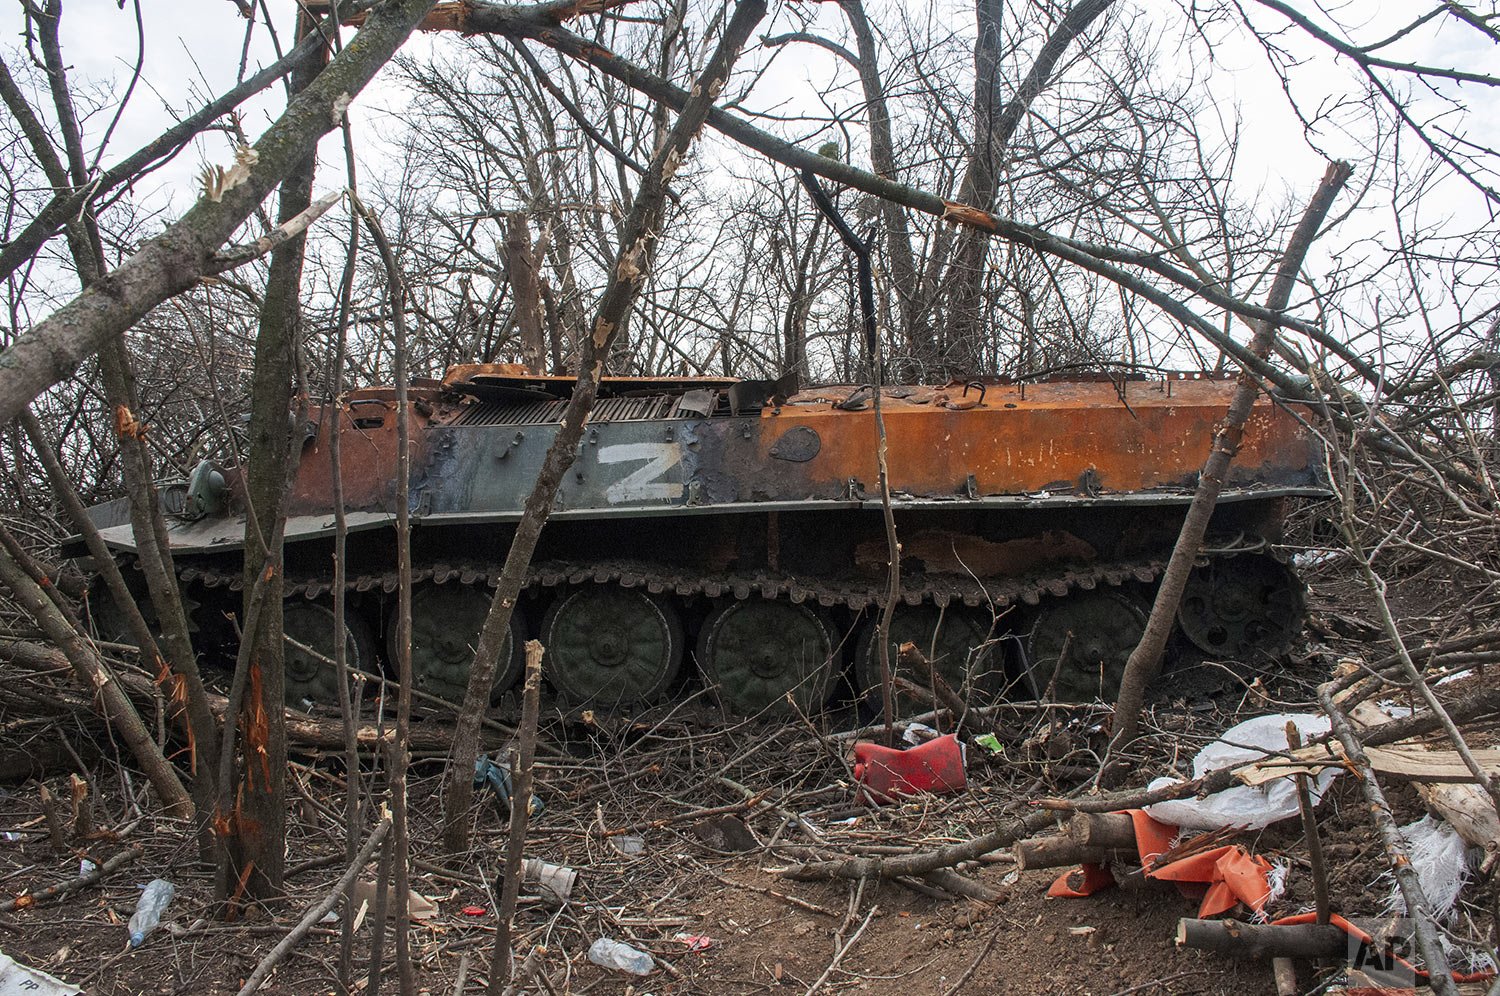  An armored vehicle sits destroyed in a field near the village of Malaya Rohan, Kharkiv region, Ukraine, Friday, April 1, 2022. (AP Photo/Andrew Marienko) 